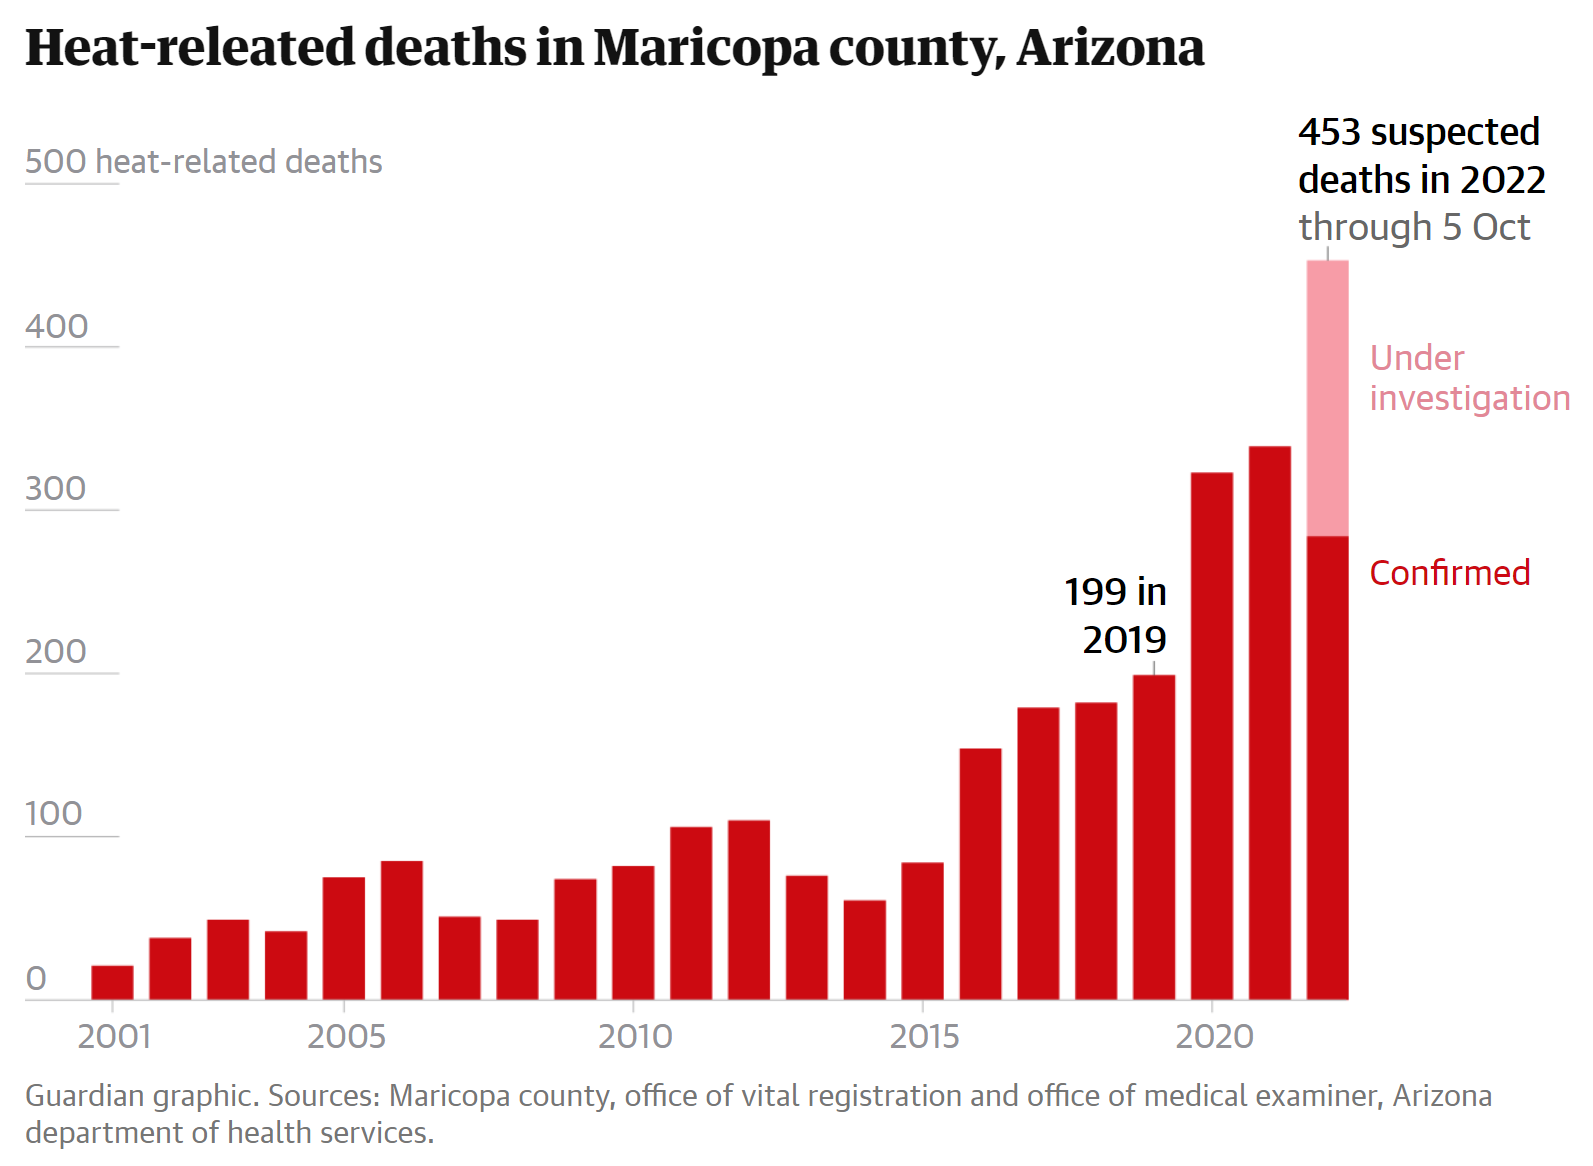 Heat-related deaths in Maricopa County, Arizona, 2001-2022. The temperature hit 110F or higher on 22 days in 2022, yet it was only the 20th hottest summer on record, according to the National Weather Service (NWS). It did not drop below 80F on 75 percent of nights between June and August. Heat effects are cumulative, and the body cannot begin to recover until the temperature drops below 80F. Data: Maricopa County, office of vital registration and office of medical examiner, Arizona department of health services. Graphic: The Guardian